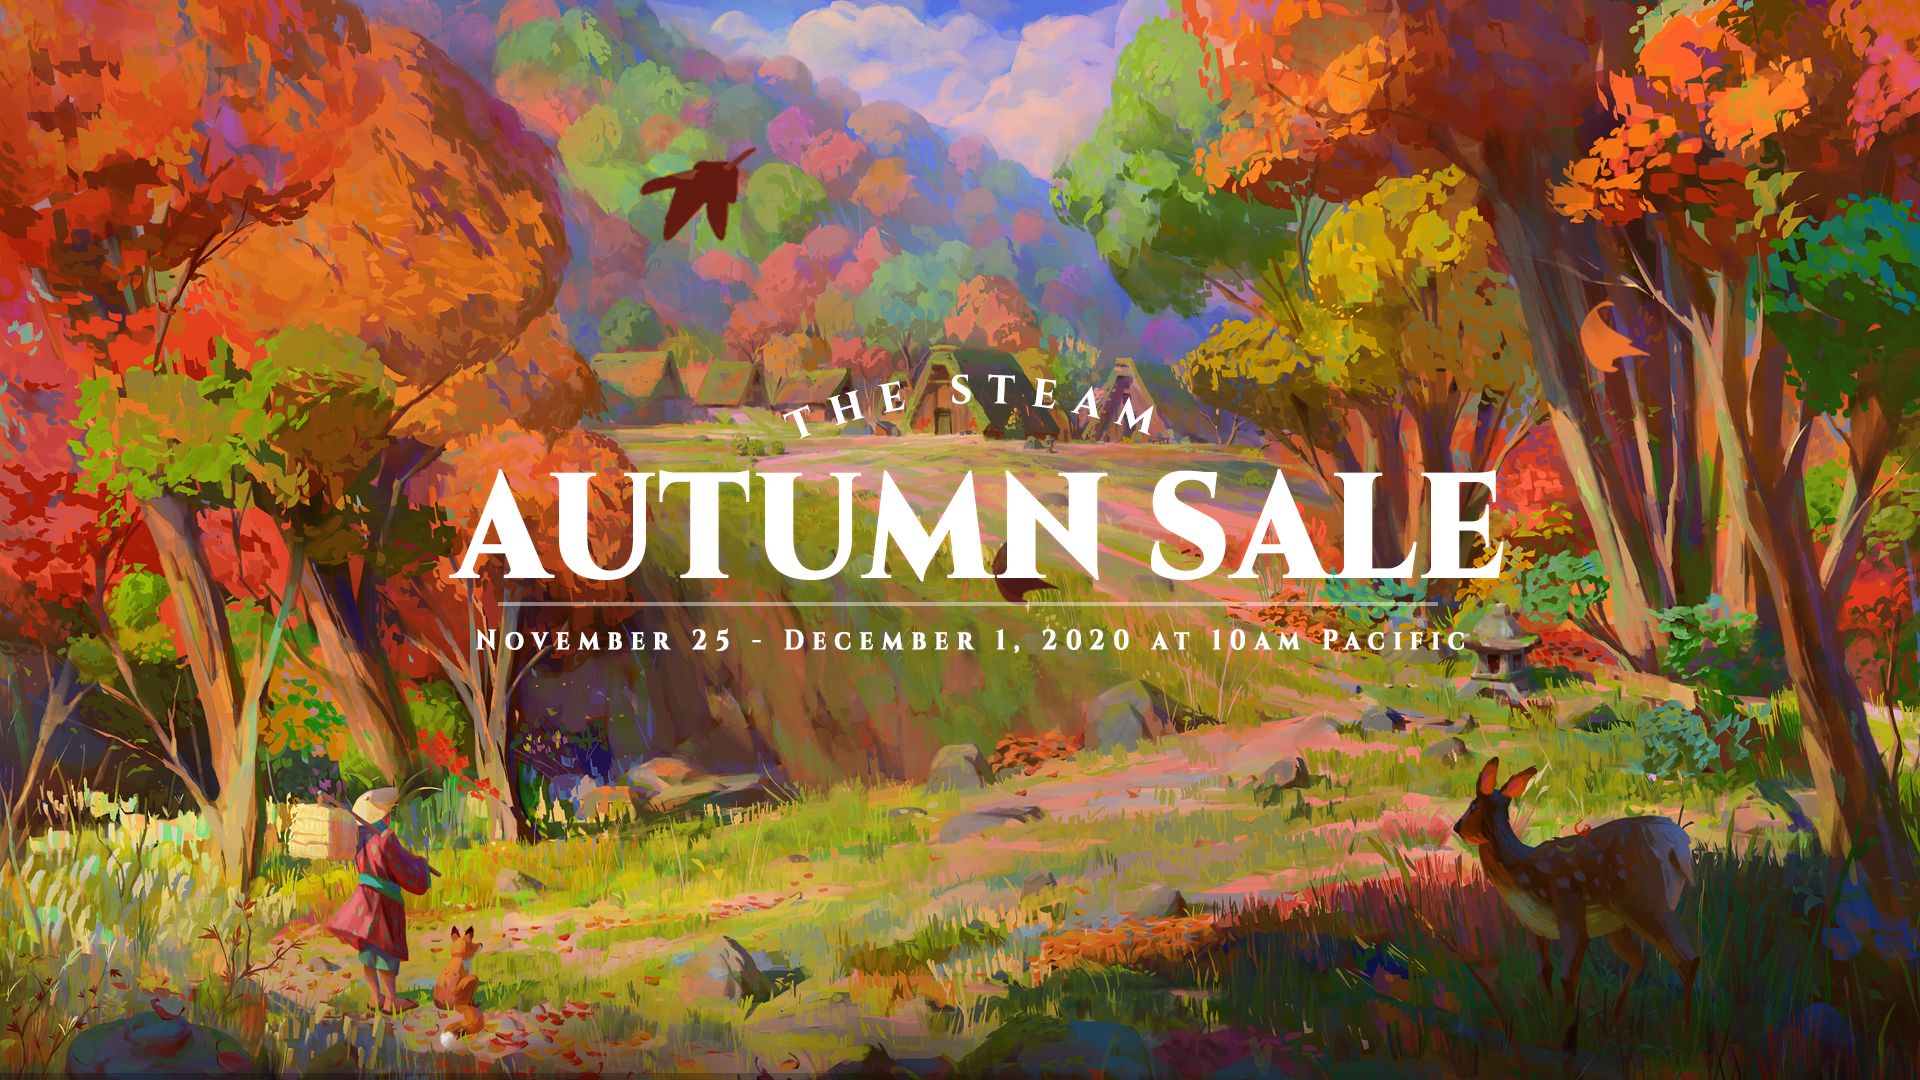 The Steam Autumn Sale ends in less than 24 hours